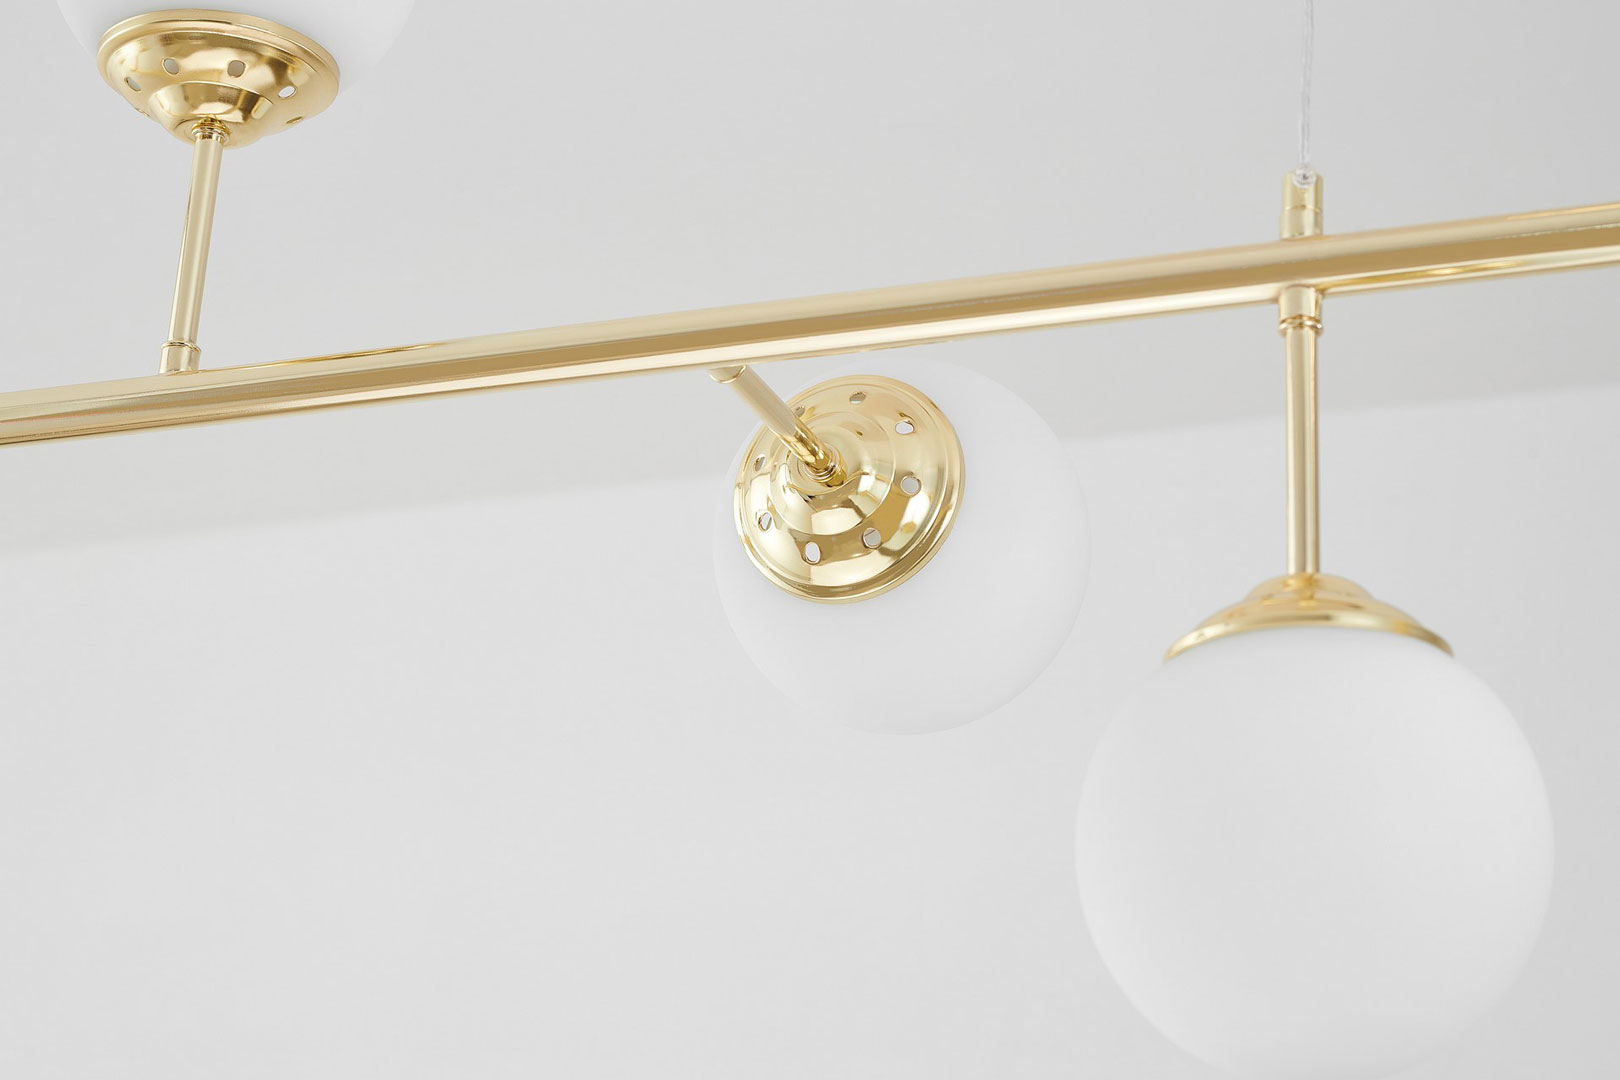 Gold chandelier, spherical shades, pendant lamp, horizontal tube, two round rosettes, classic gold - FINO - Lampit image 4